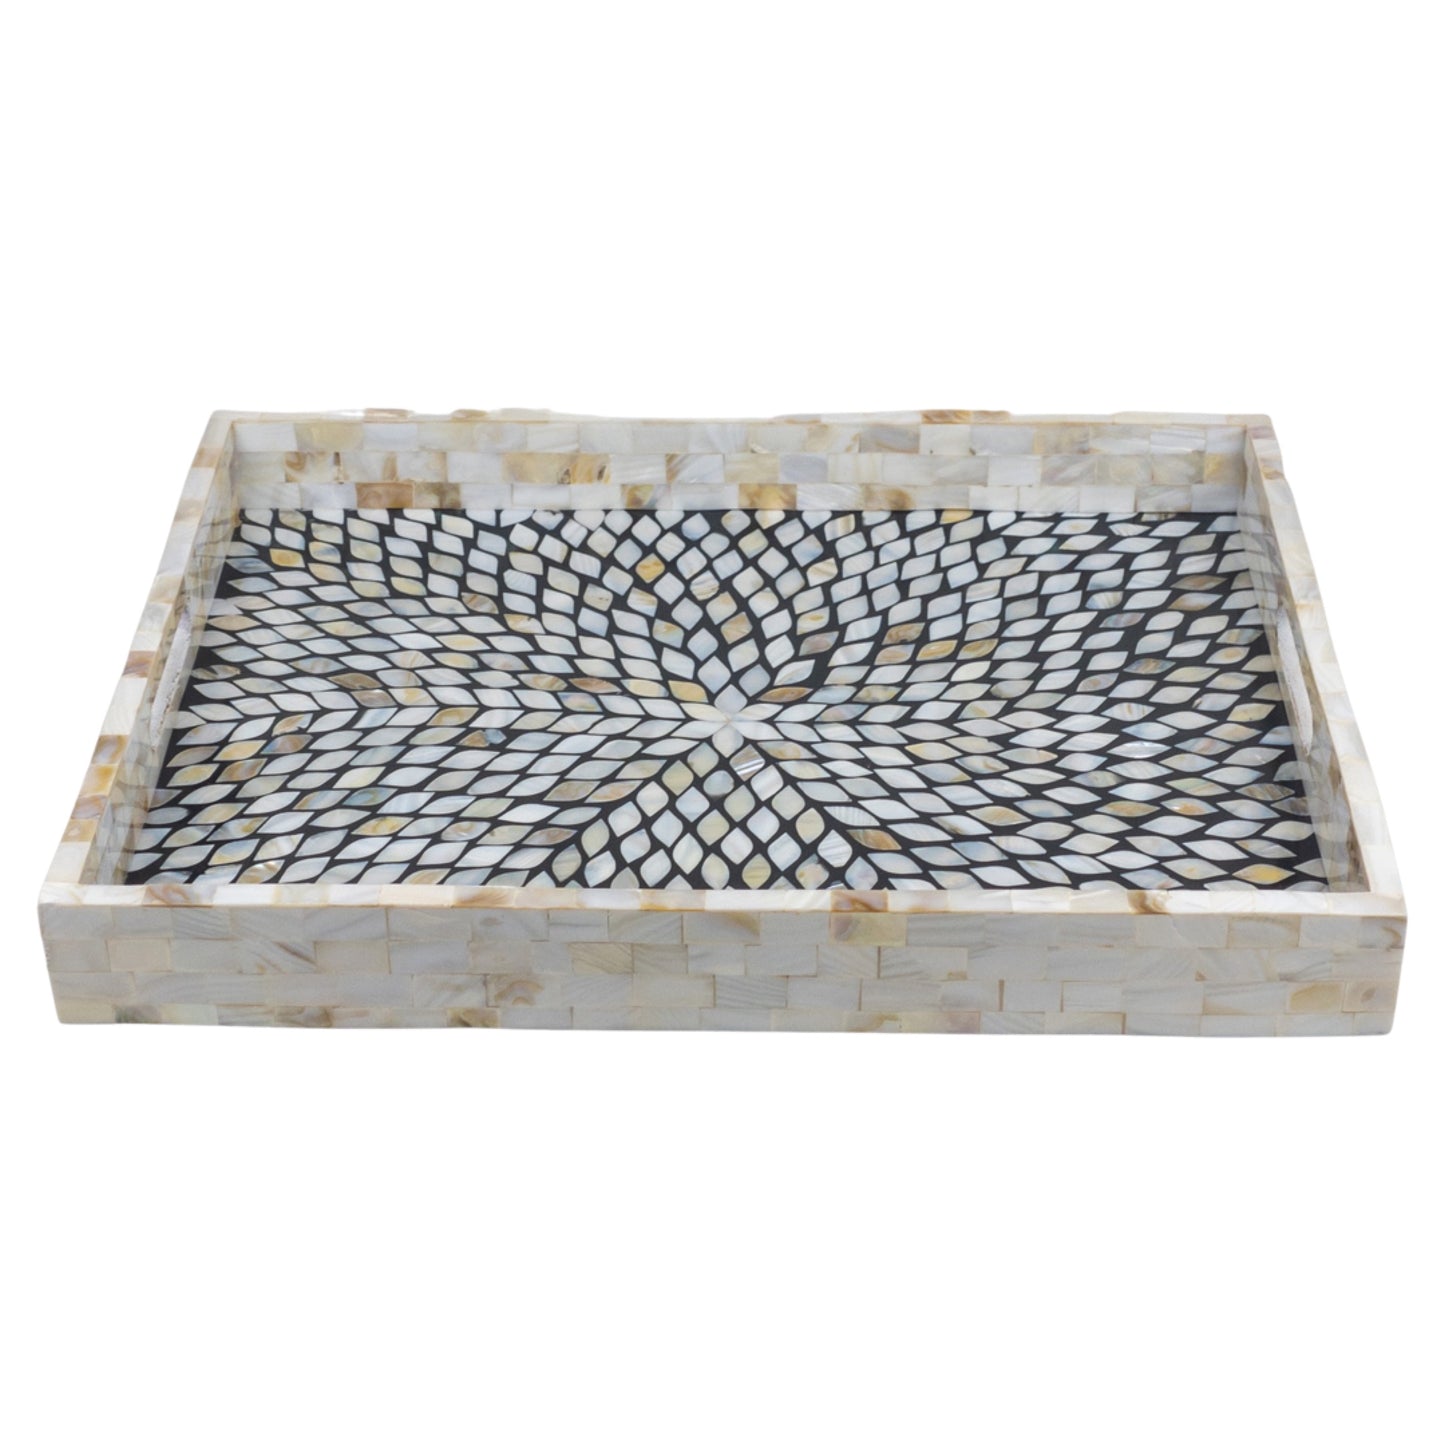 Mother of Pearl Tray Star pattern - Black